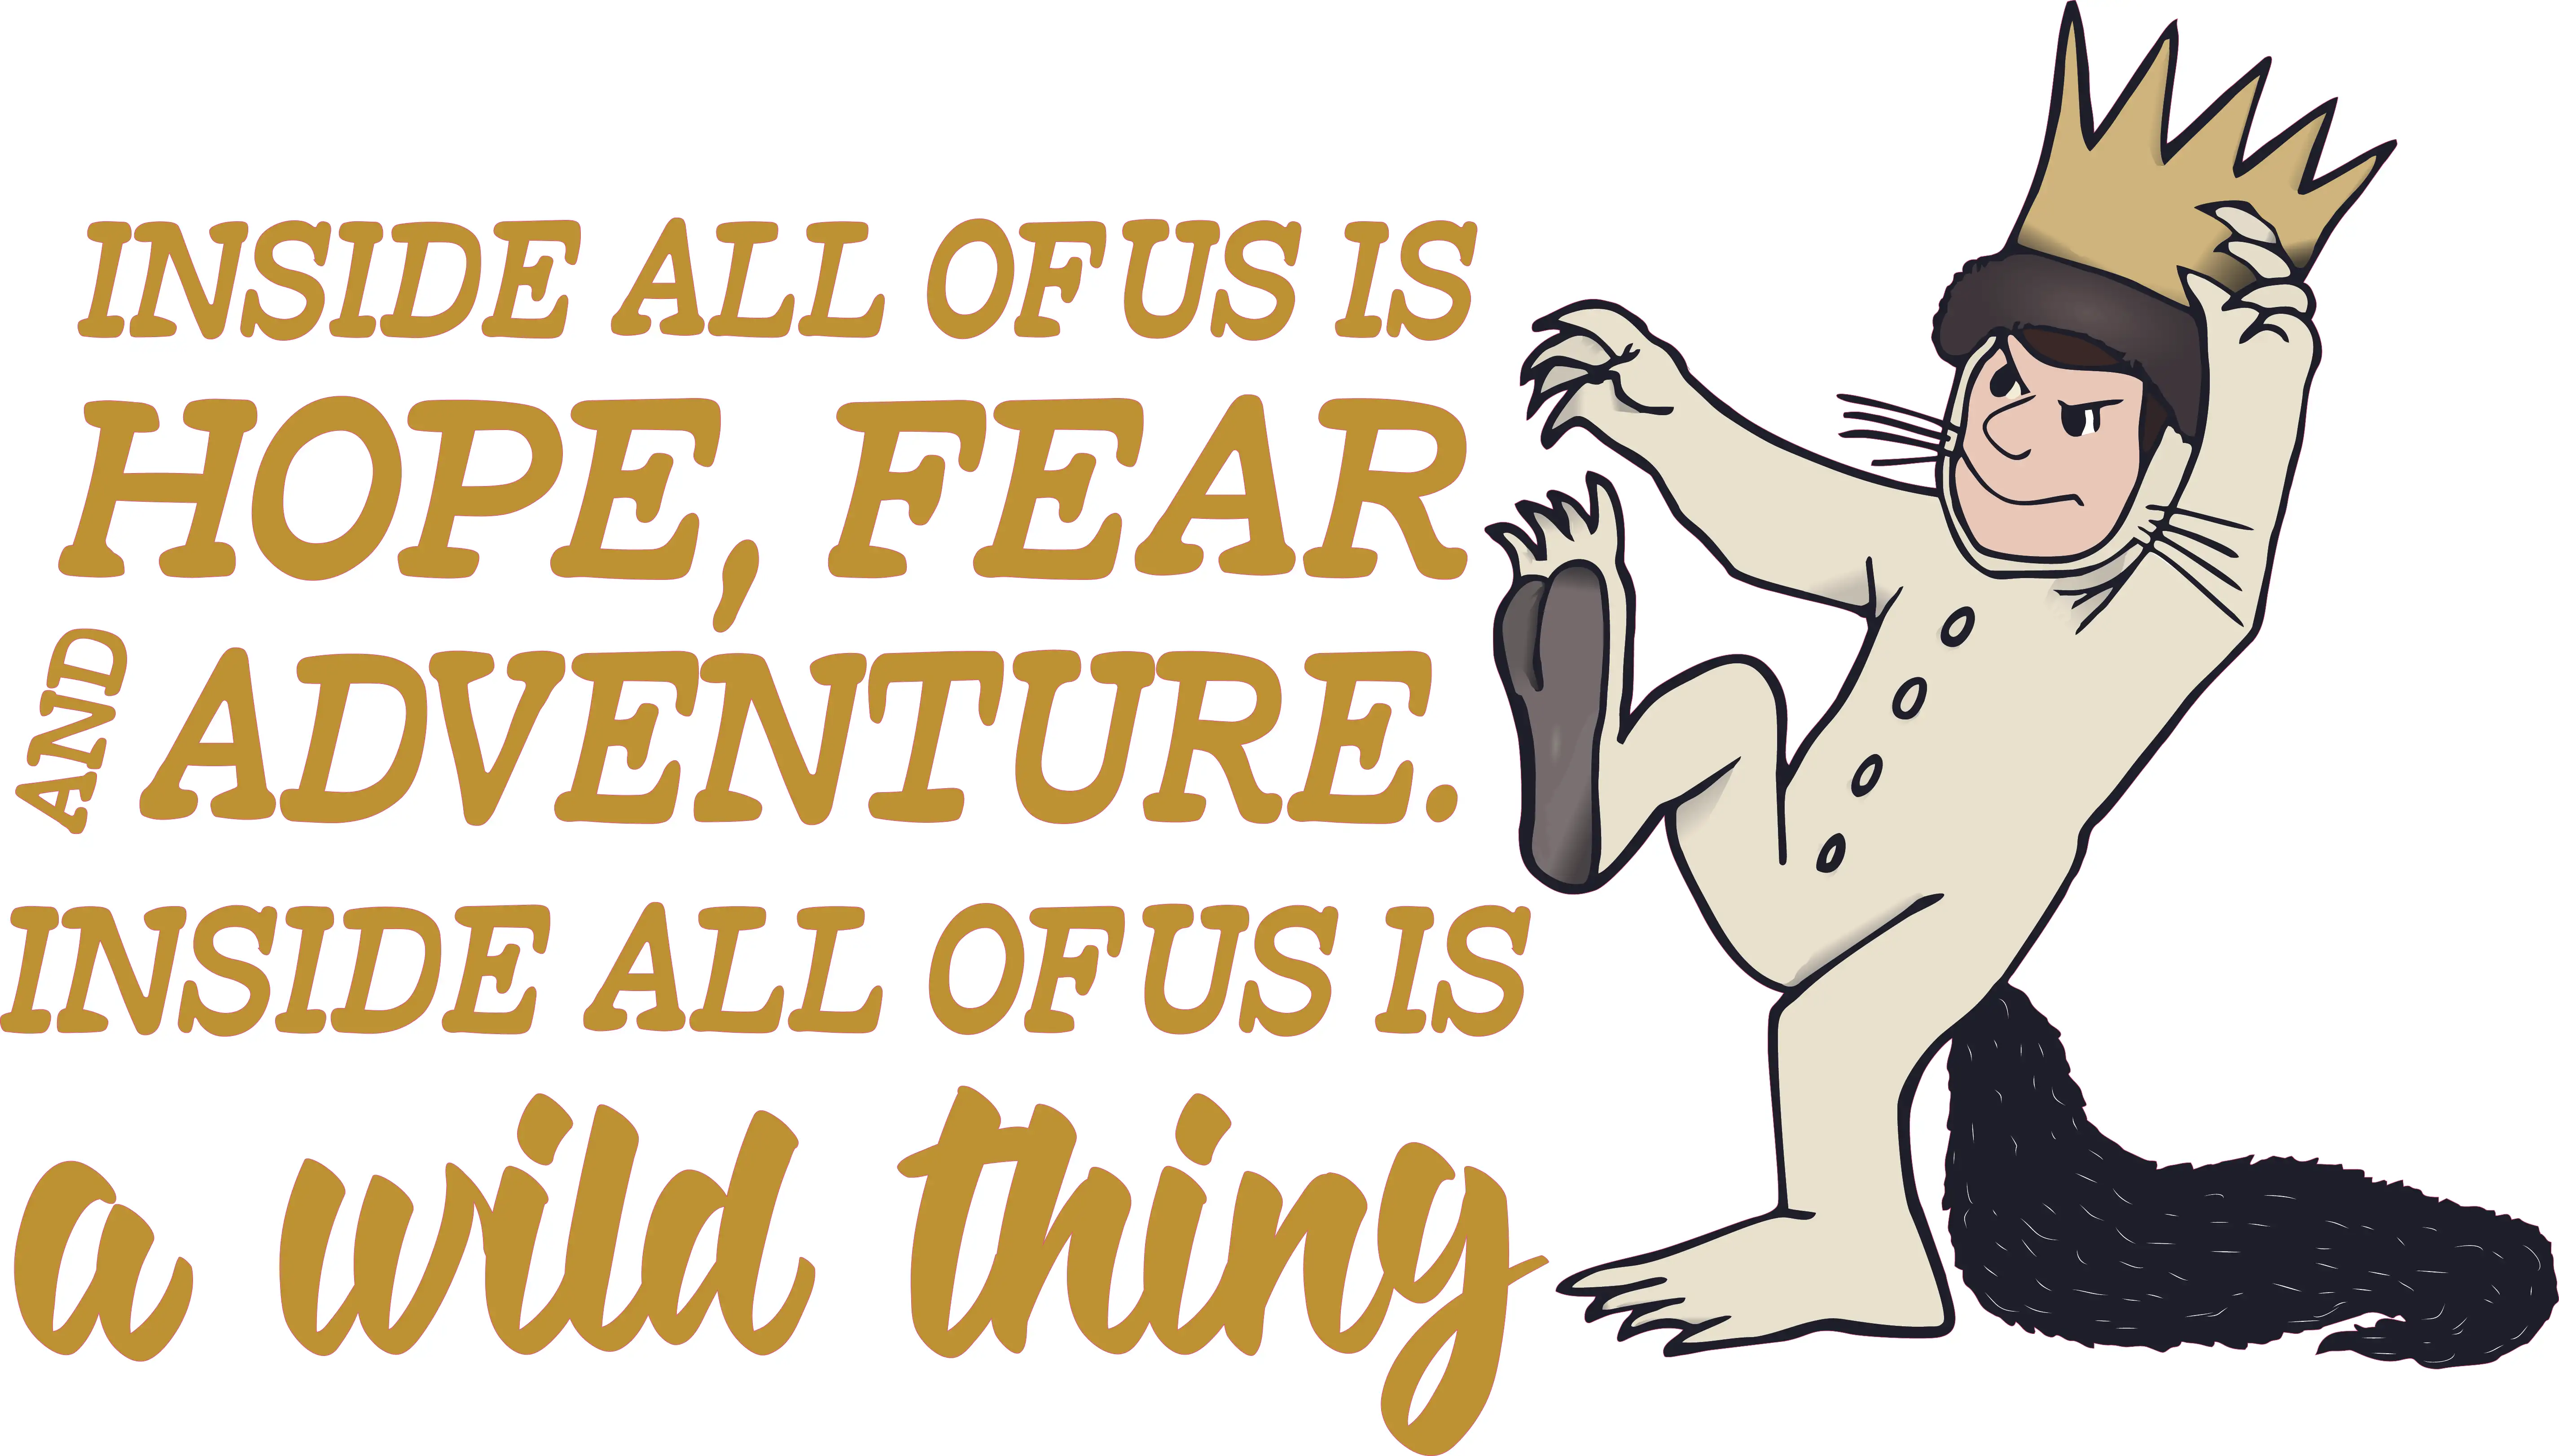 Where the wild things are quote